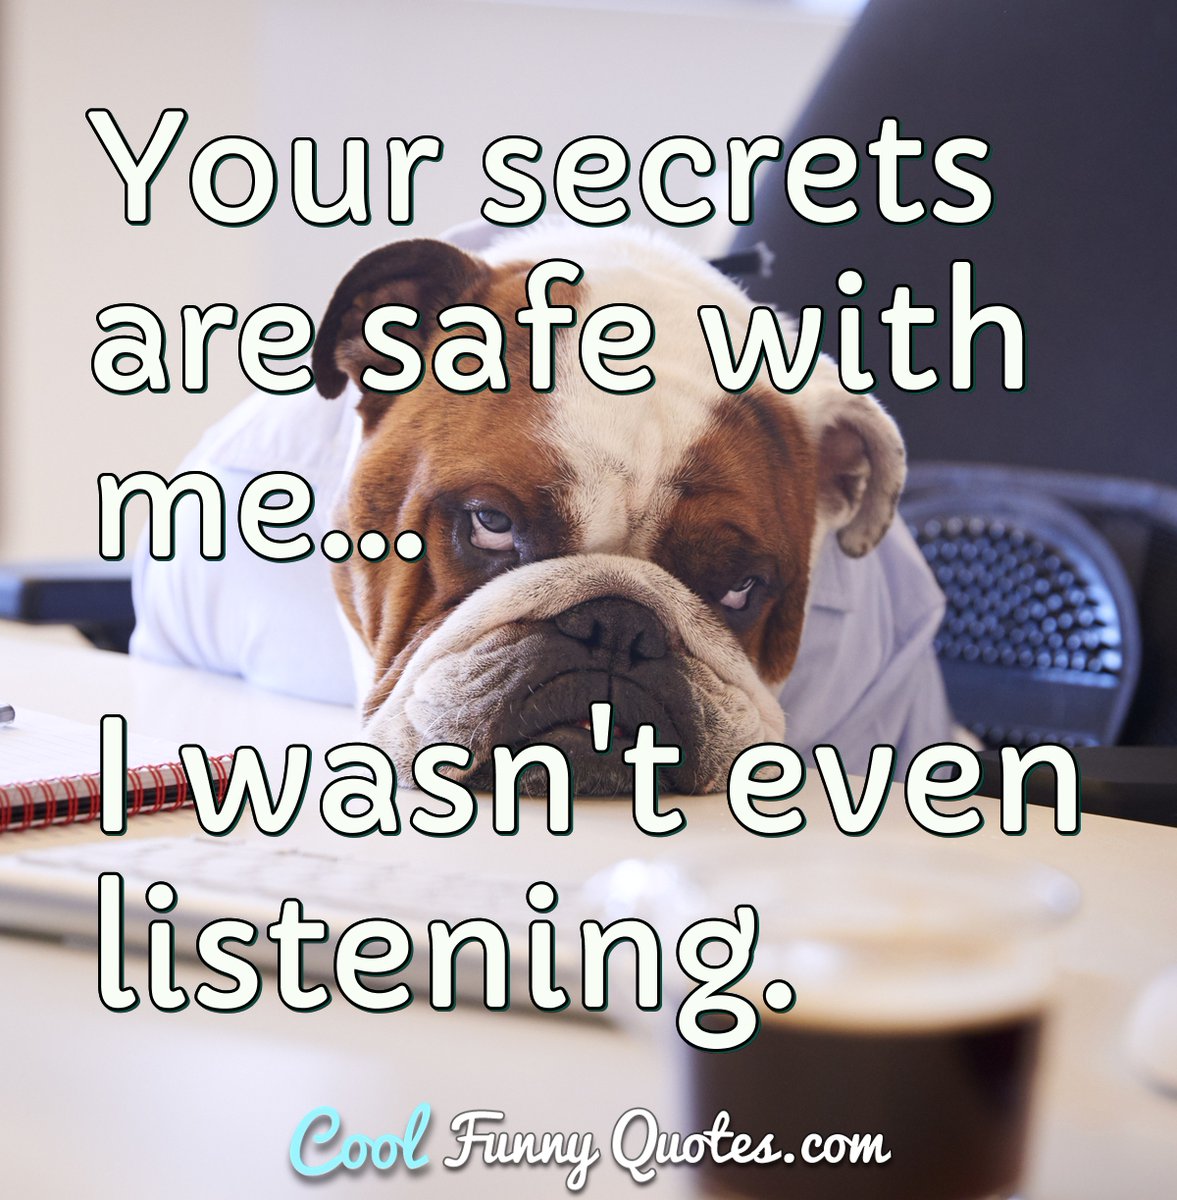 Funny Quotes About Secrets Your Secrets Are